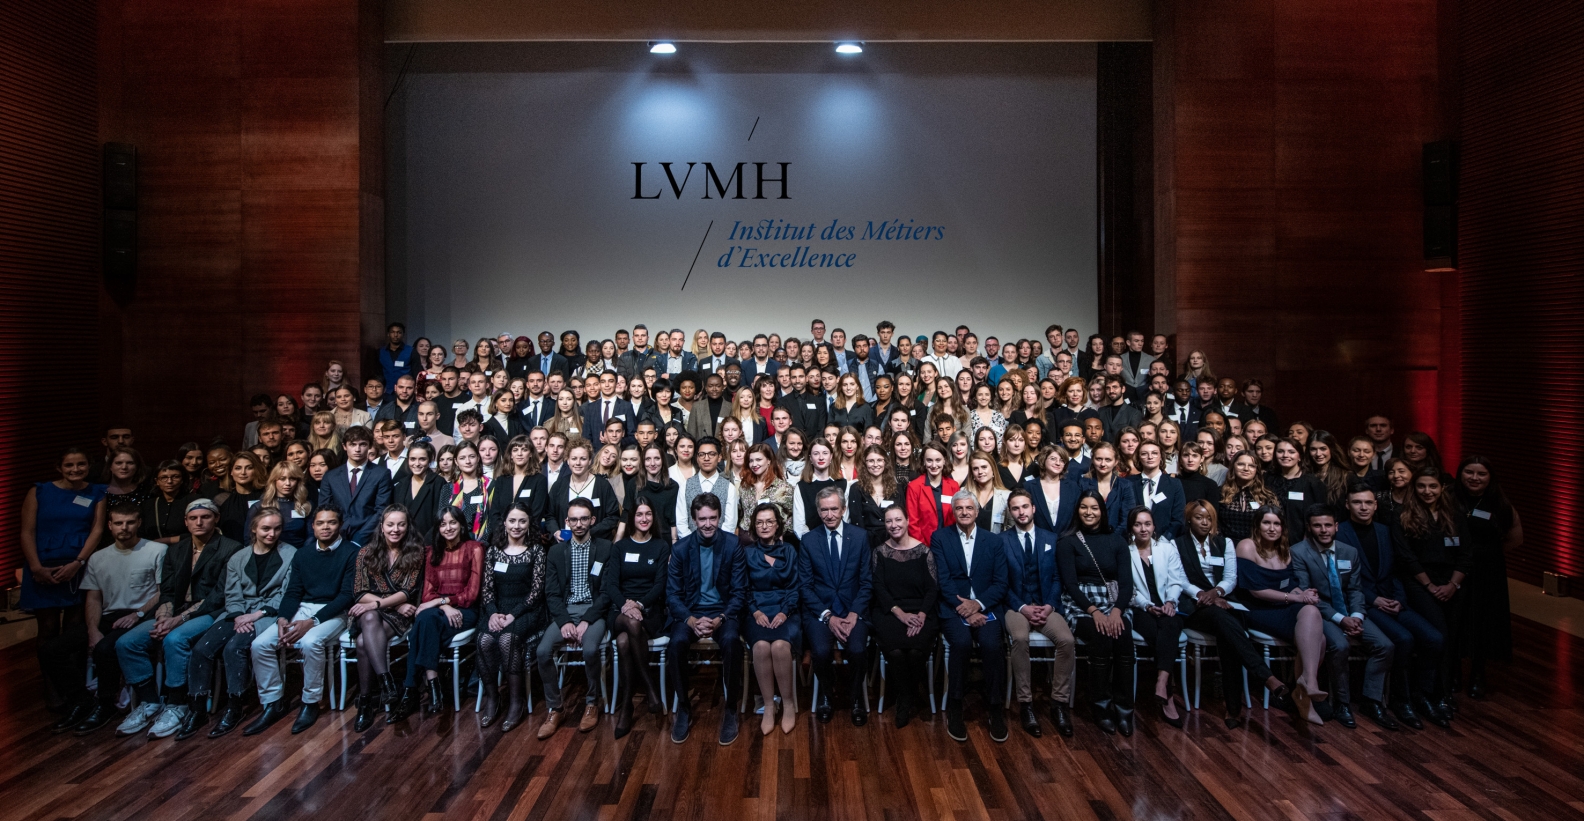 LVMH launches first edition of Institut des Métiers d'Excellence